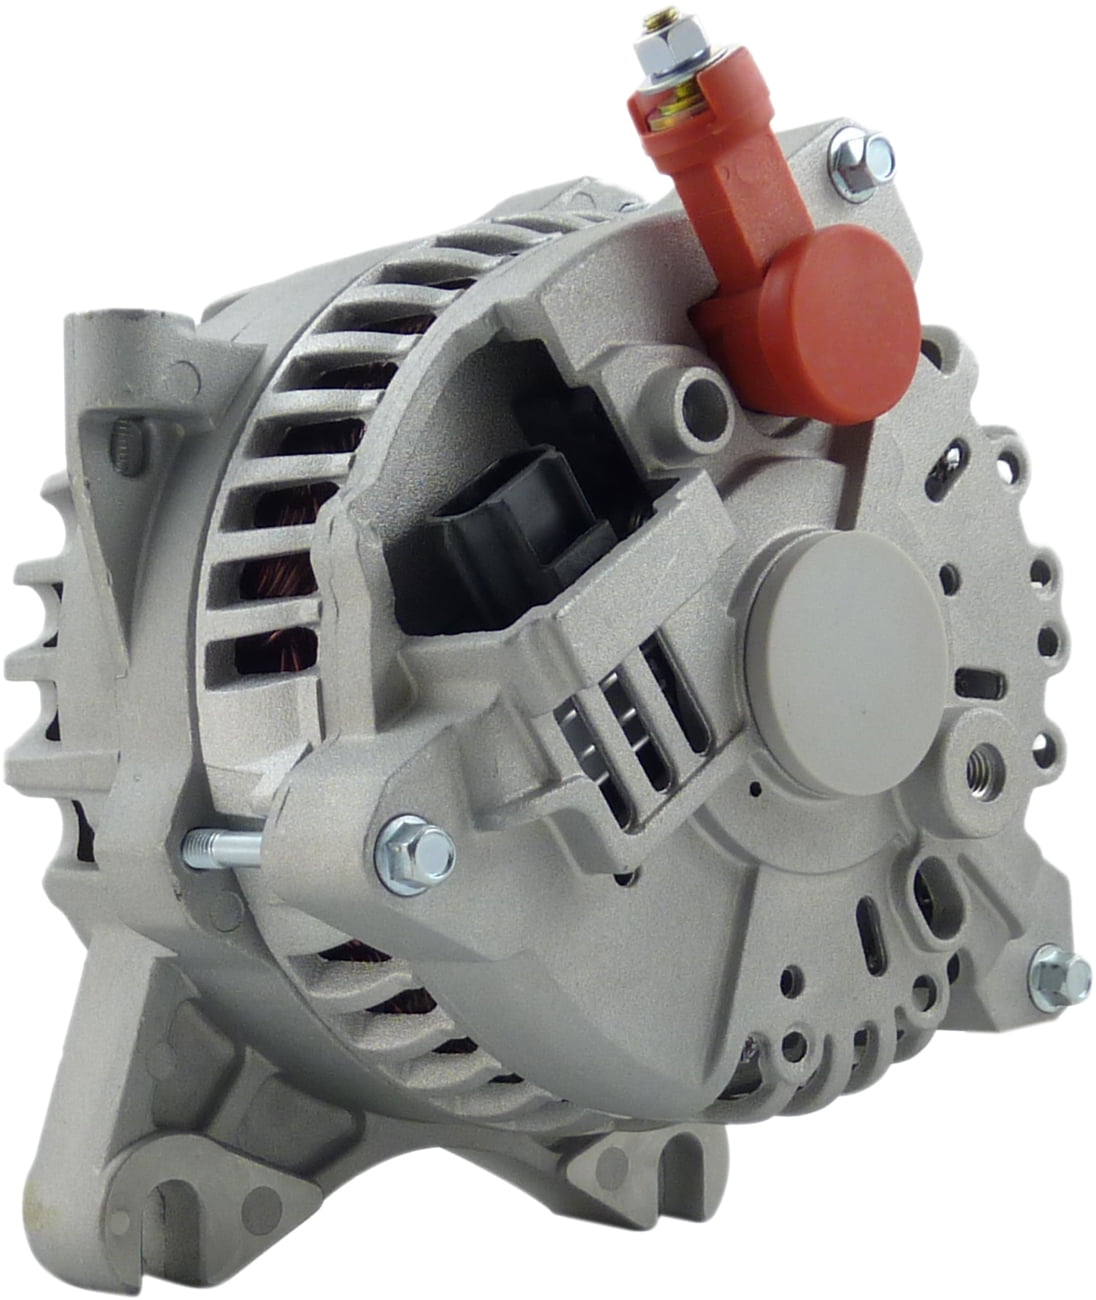 LUCAS ALTERNATOR FOR FORD CROWN VICTORIA LINCOLN TOWN CAR 4.6L 98-02 LESTER 7795 